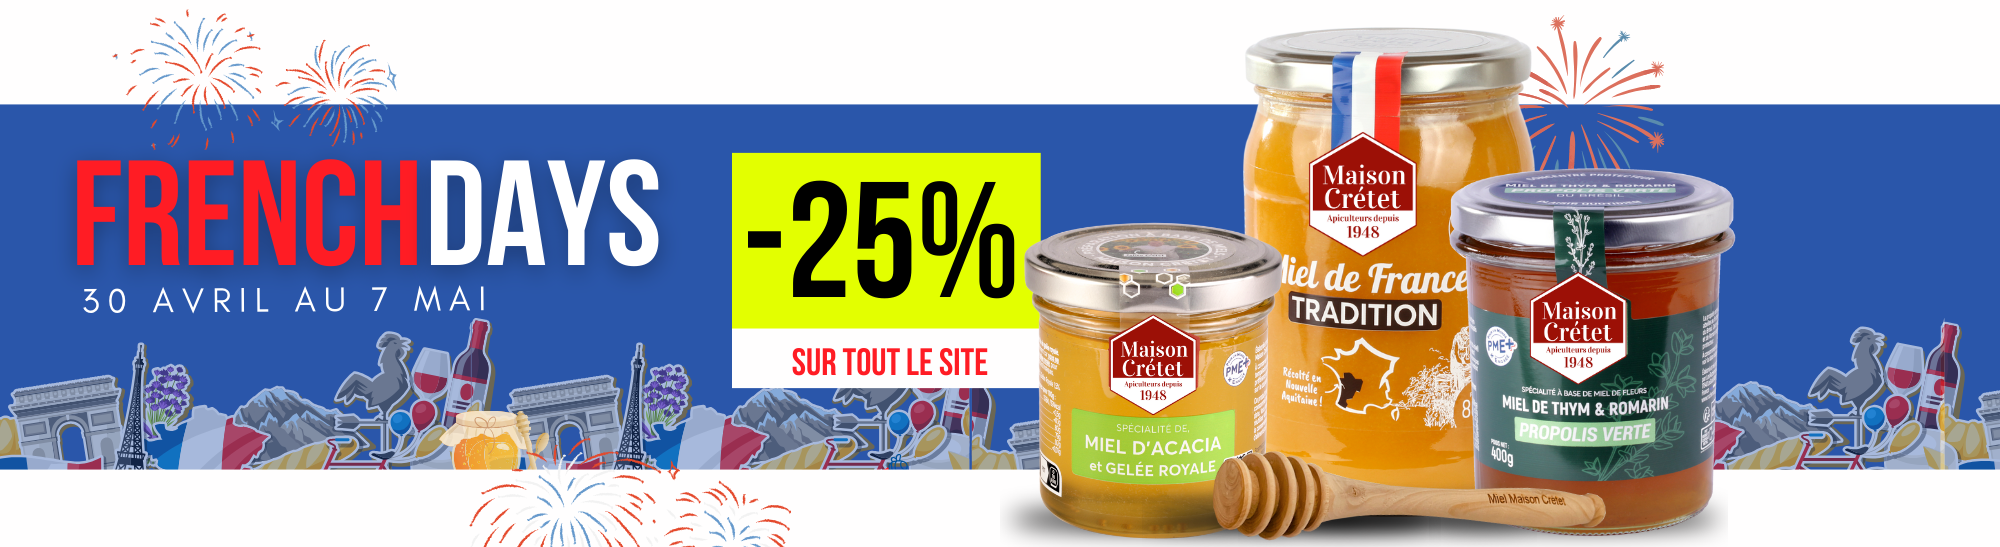 french days 25% de remise